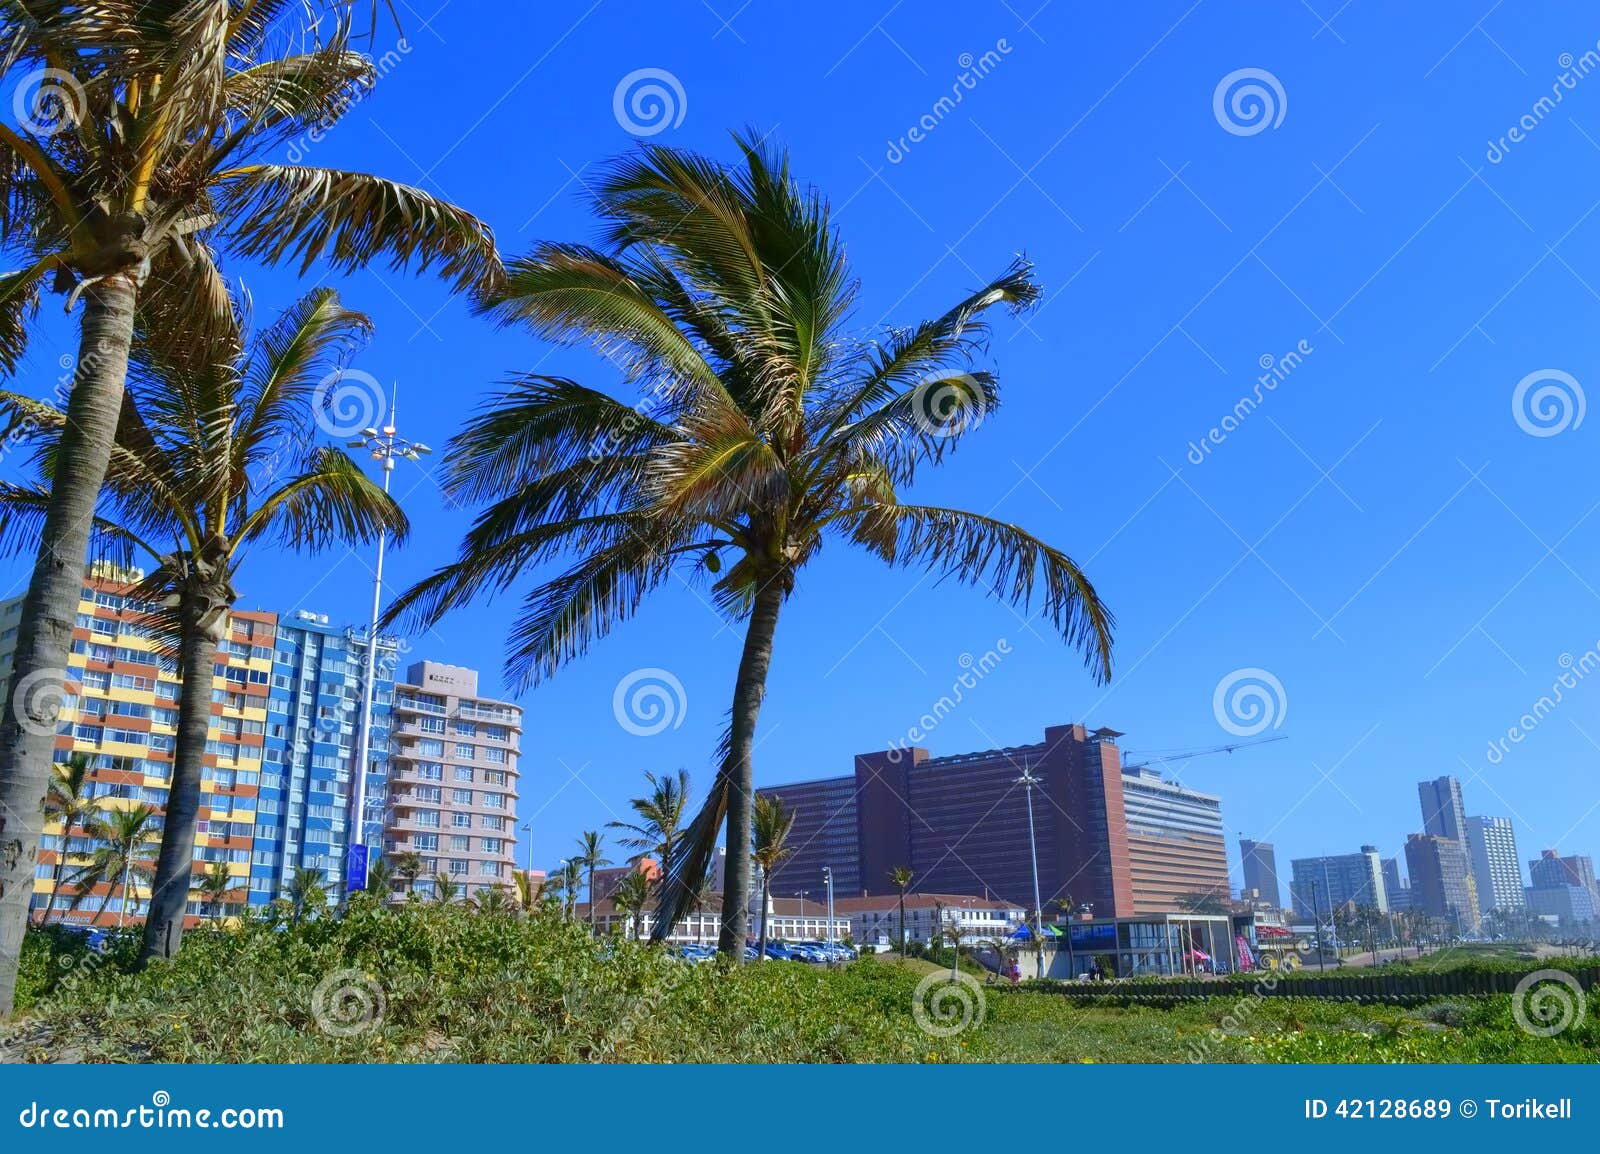 palm-trees-durban-sea-front-south-africa